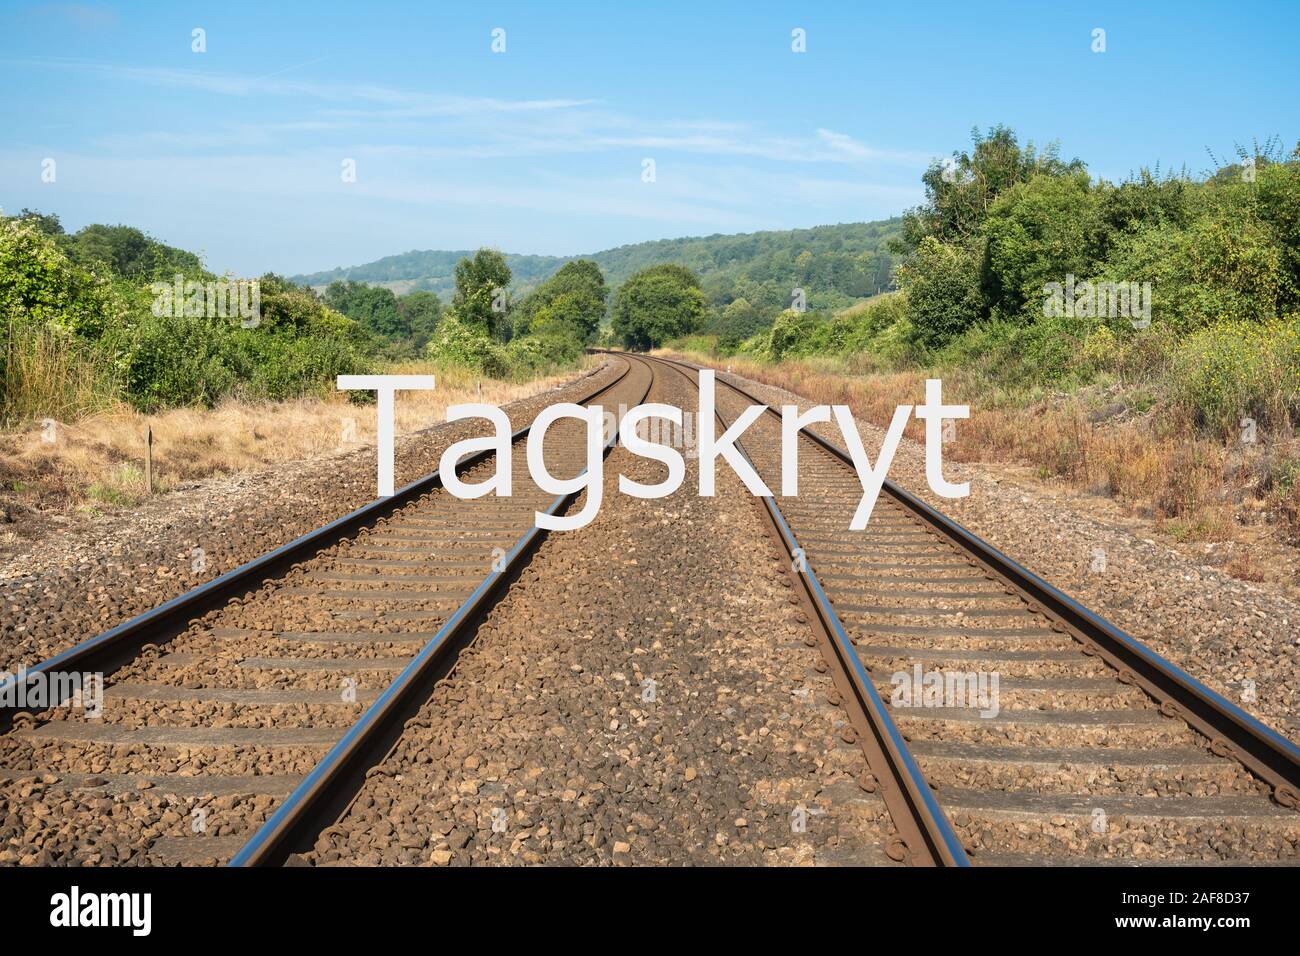 Tagskryt (Swedish for train bragging) concept image - using trains instead of flying for reduced carbon footprint travel Stock Photo